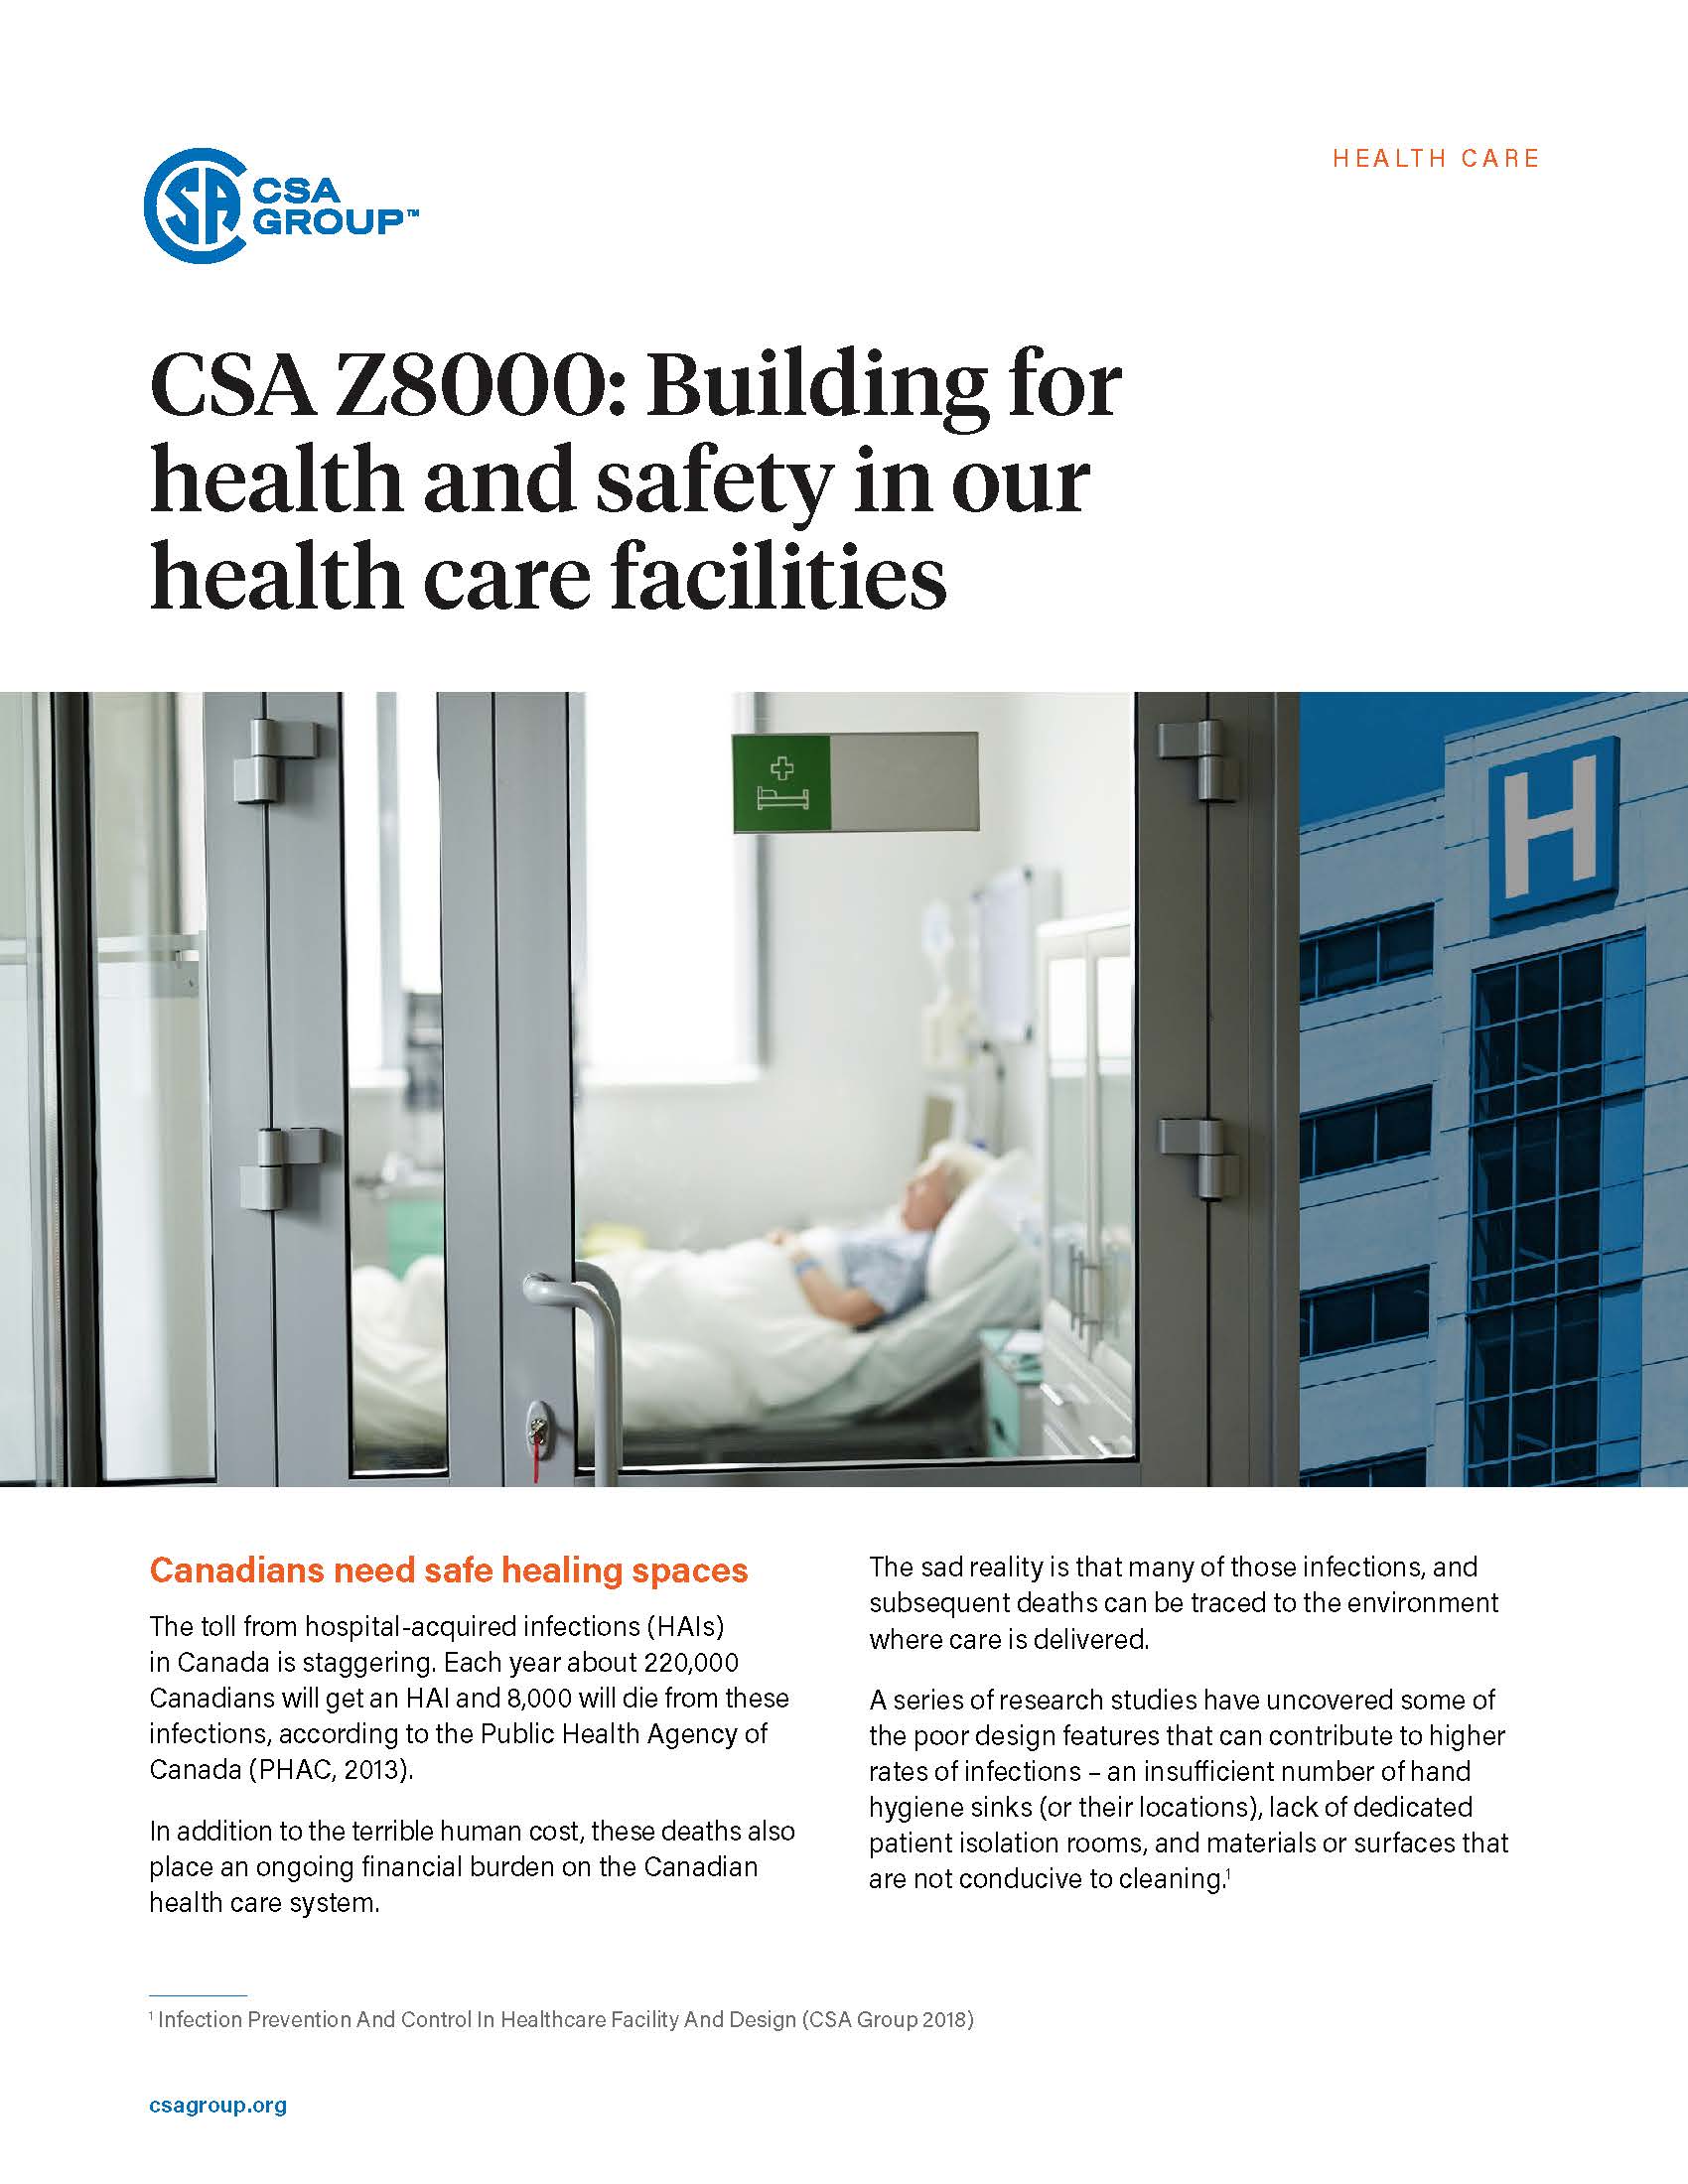 CSA Z8000: Building for health and safety in our health care facilities